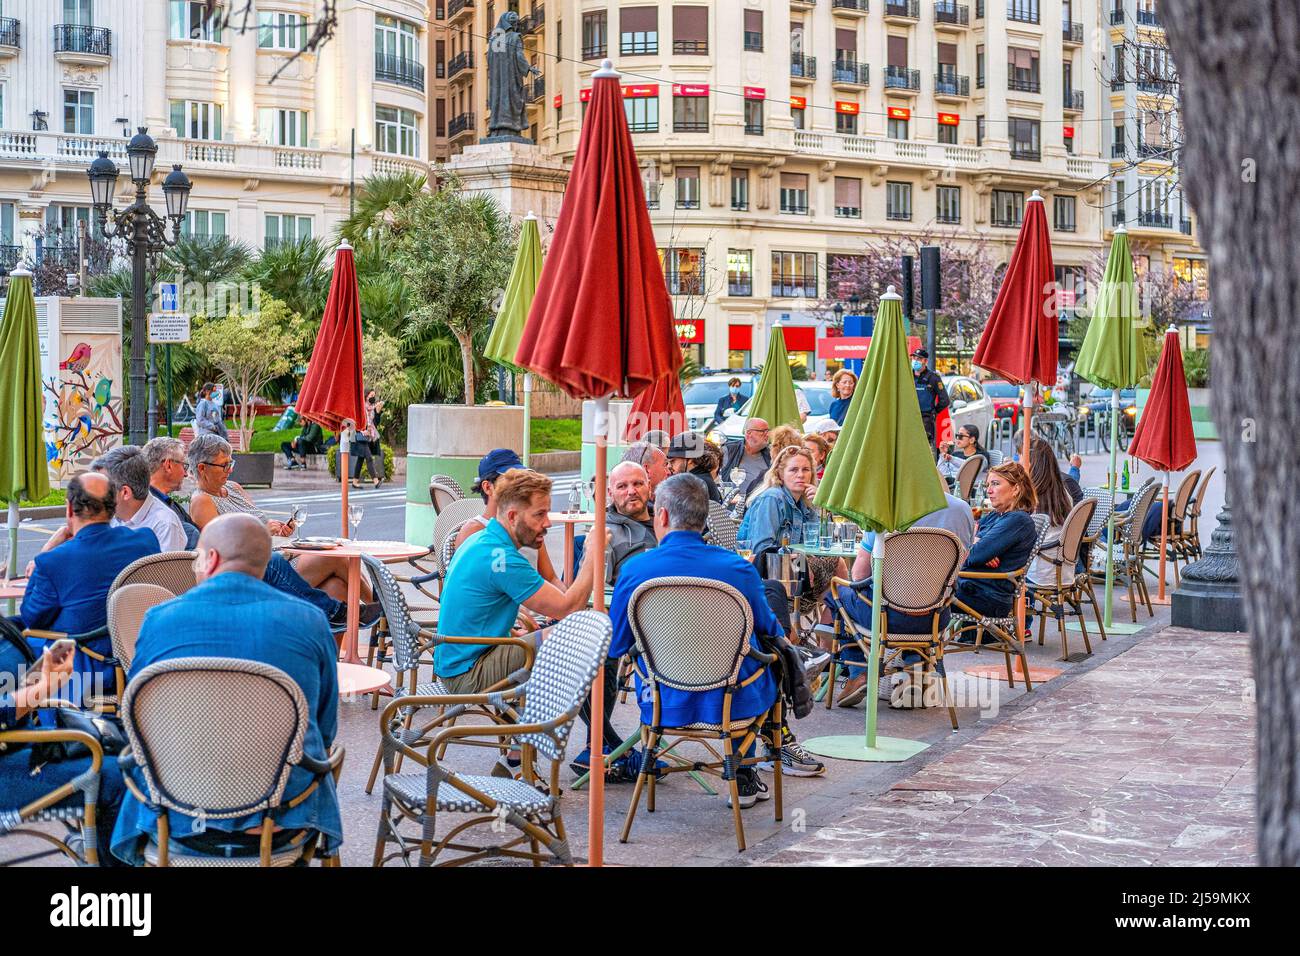 Tourists or group of people sitting on a restaurant patio in the Plaza del Ayuntamiento or City Hall Town Square. Located in the old town, this reside Stock Photo